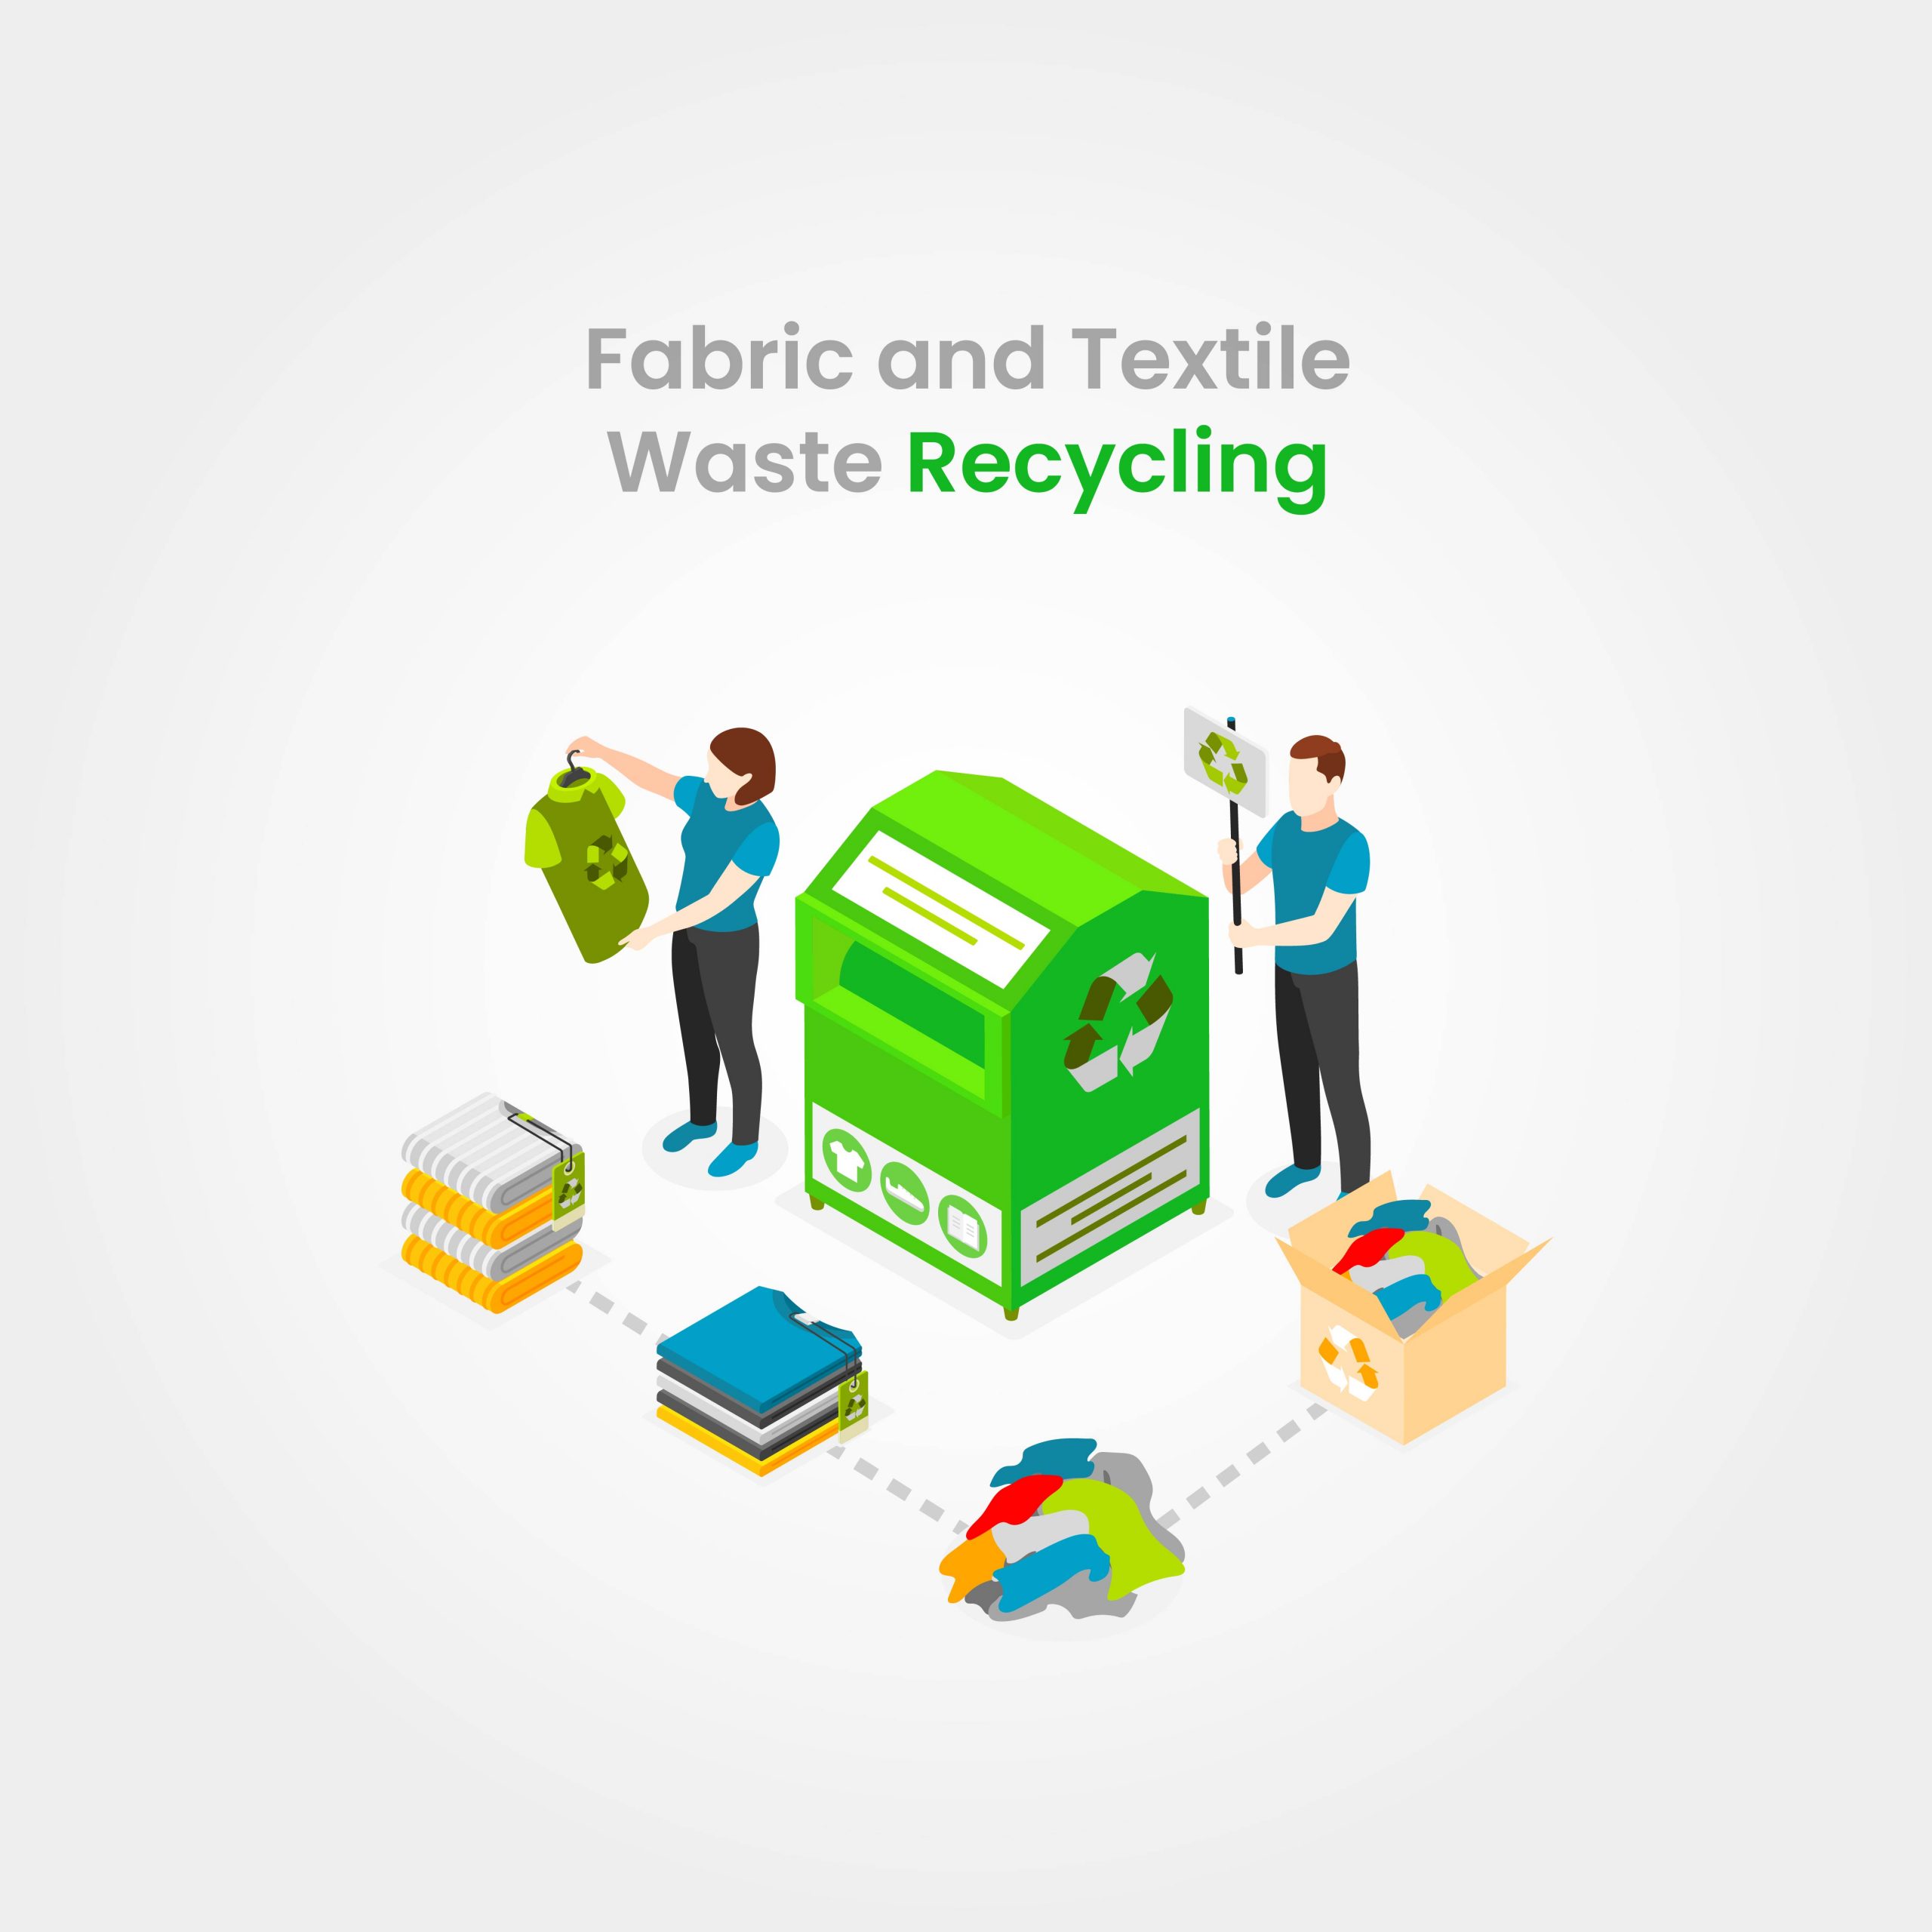 Fabric and Textile Waste Recycling: An In-Depth Analysis